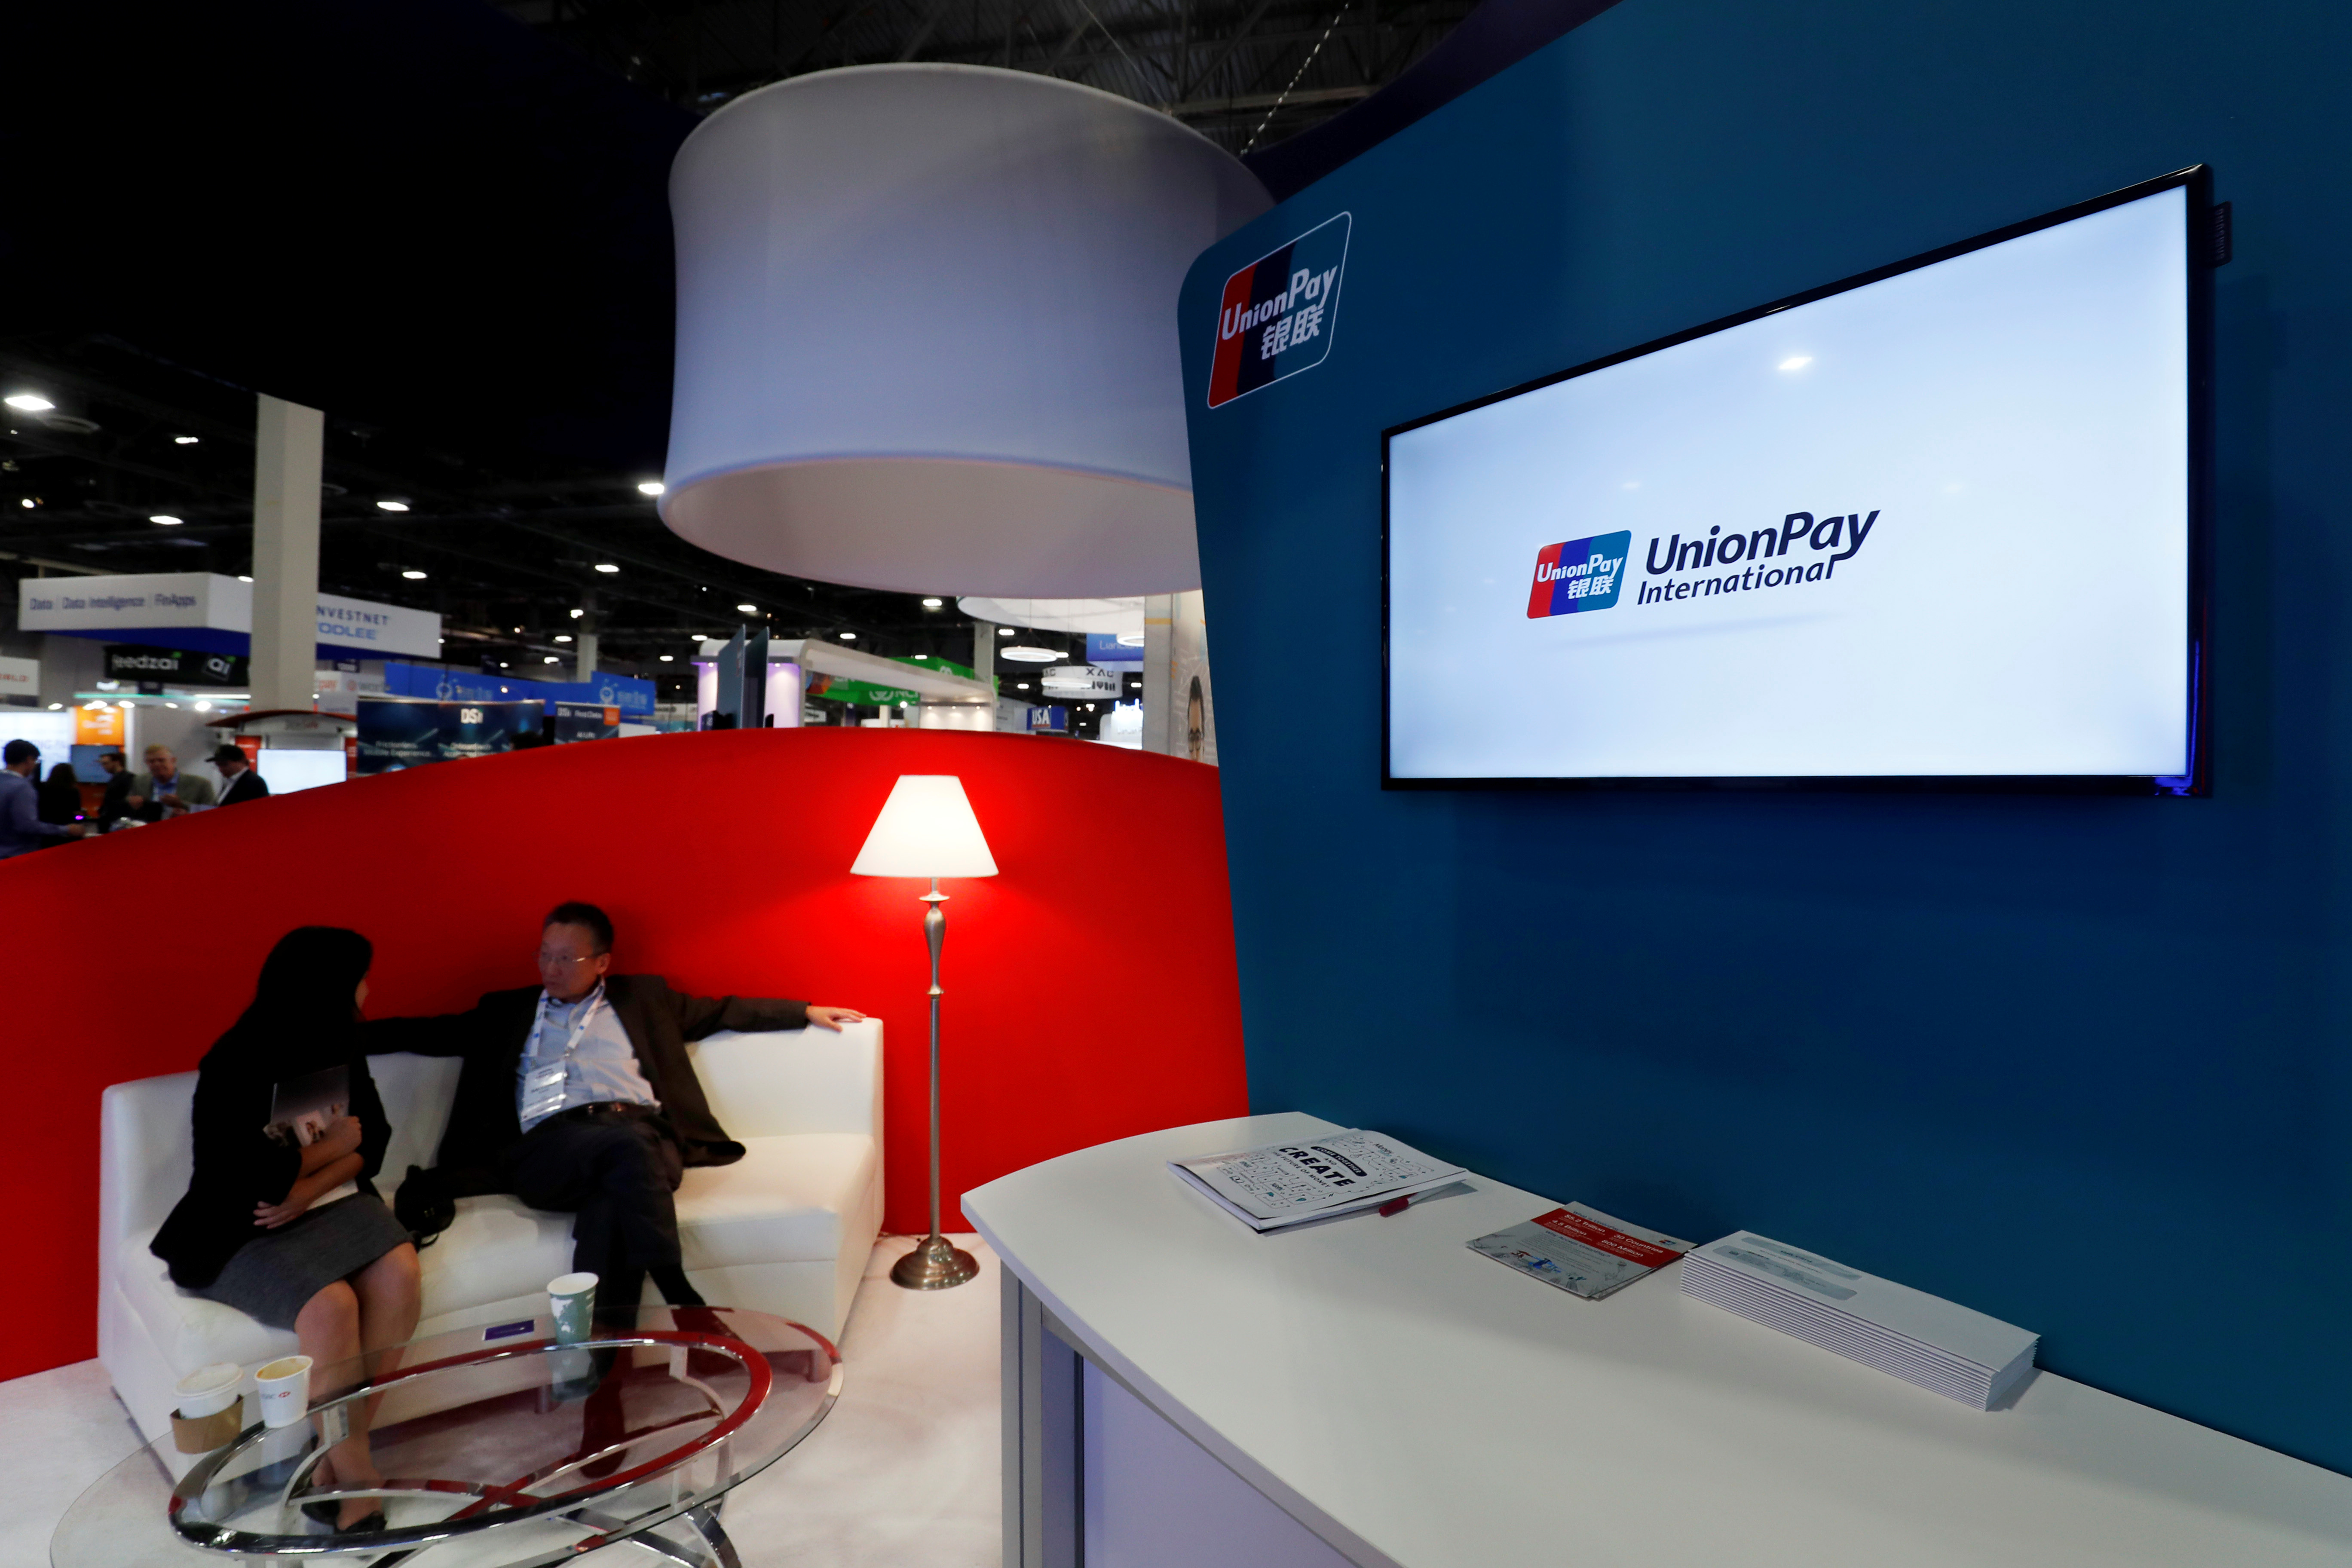 UnionPay, a Chinese credit card company, displays on the exhibit hall floor during the Money 20/20 conference in Las Vegas